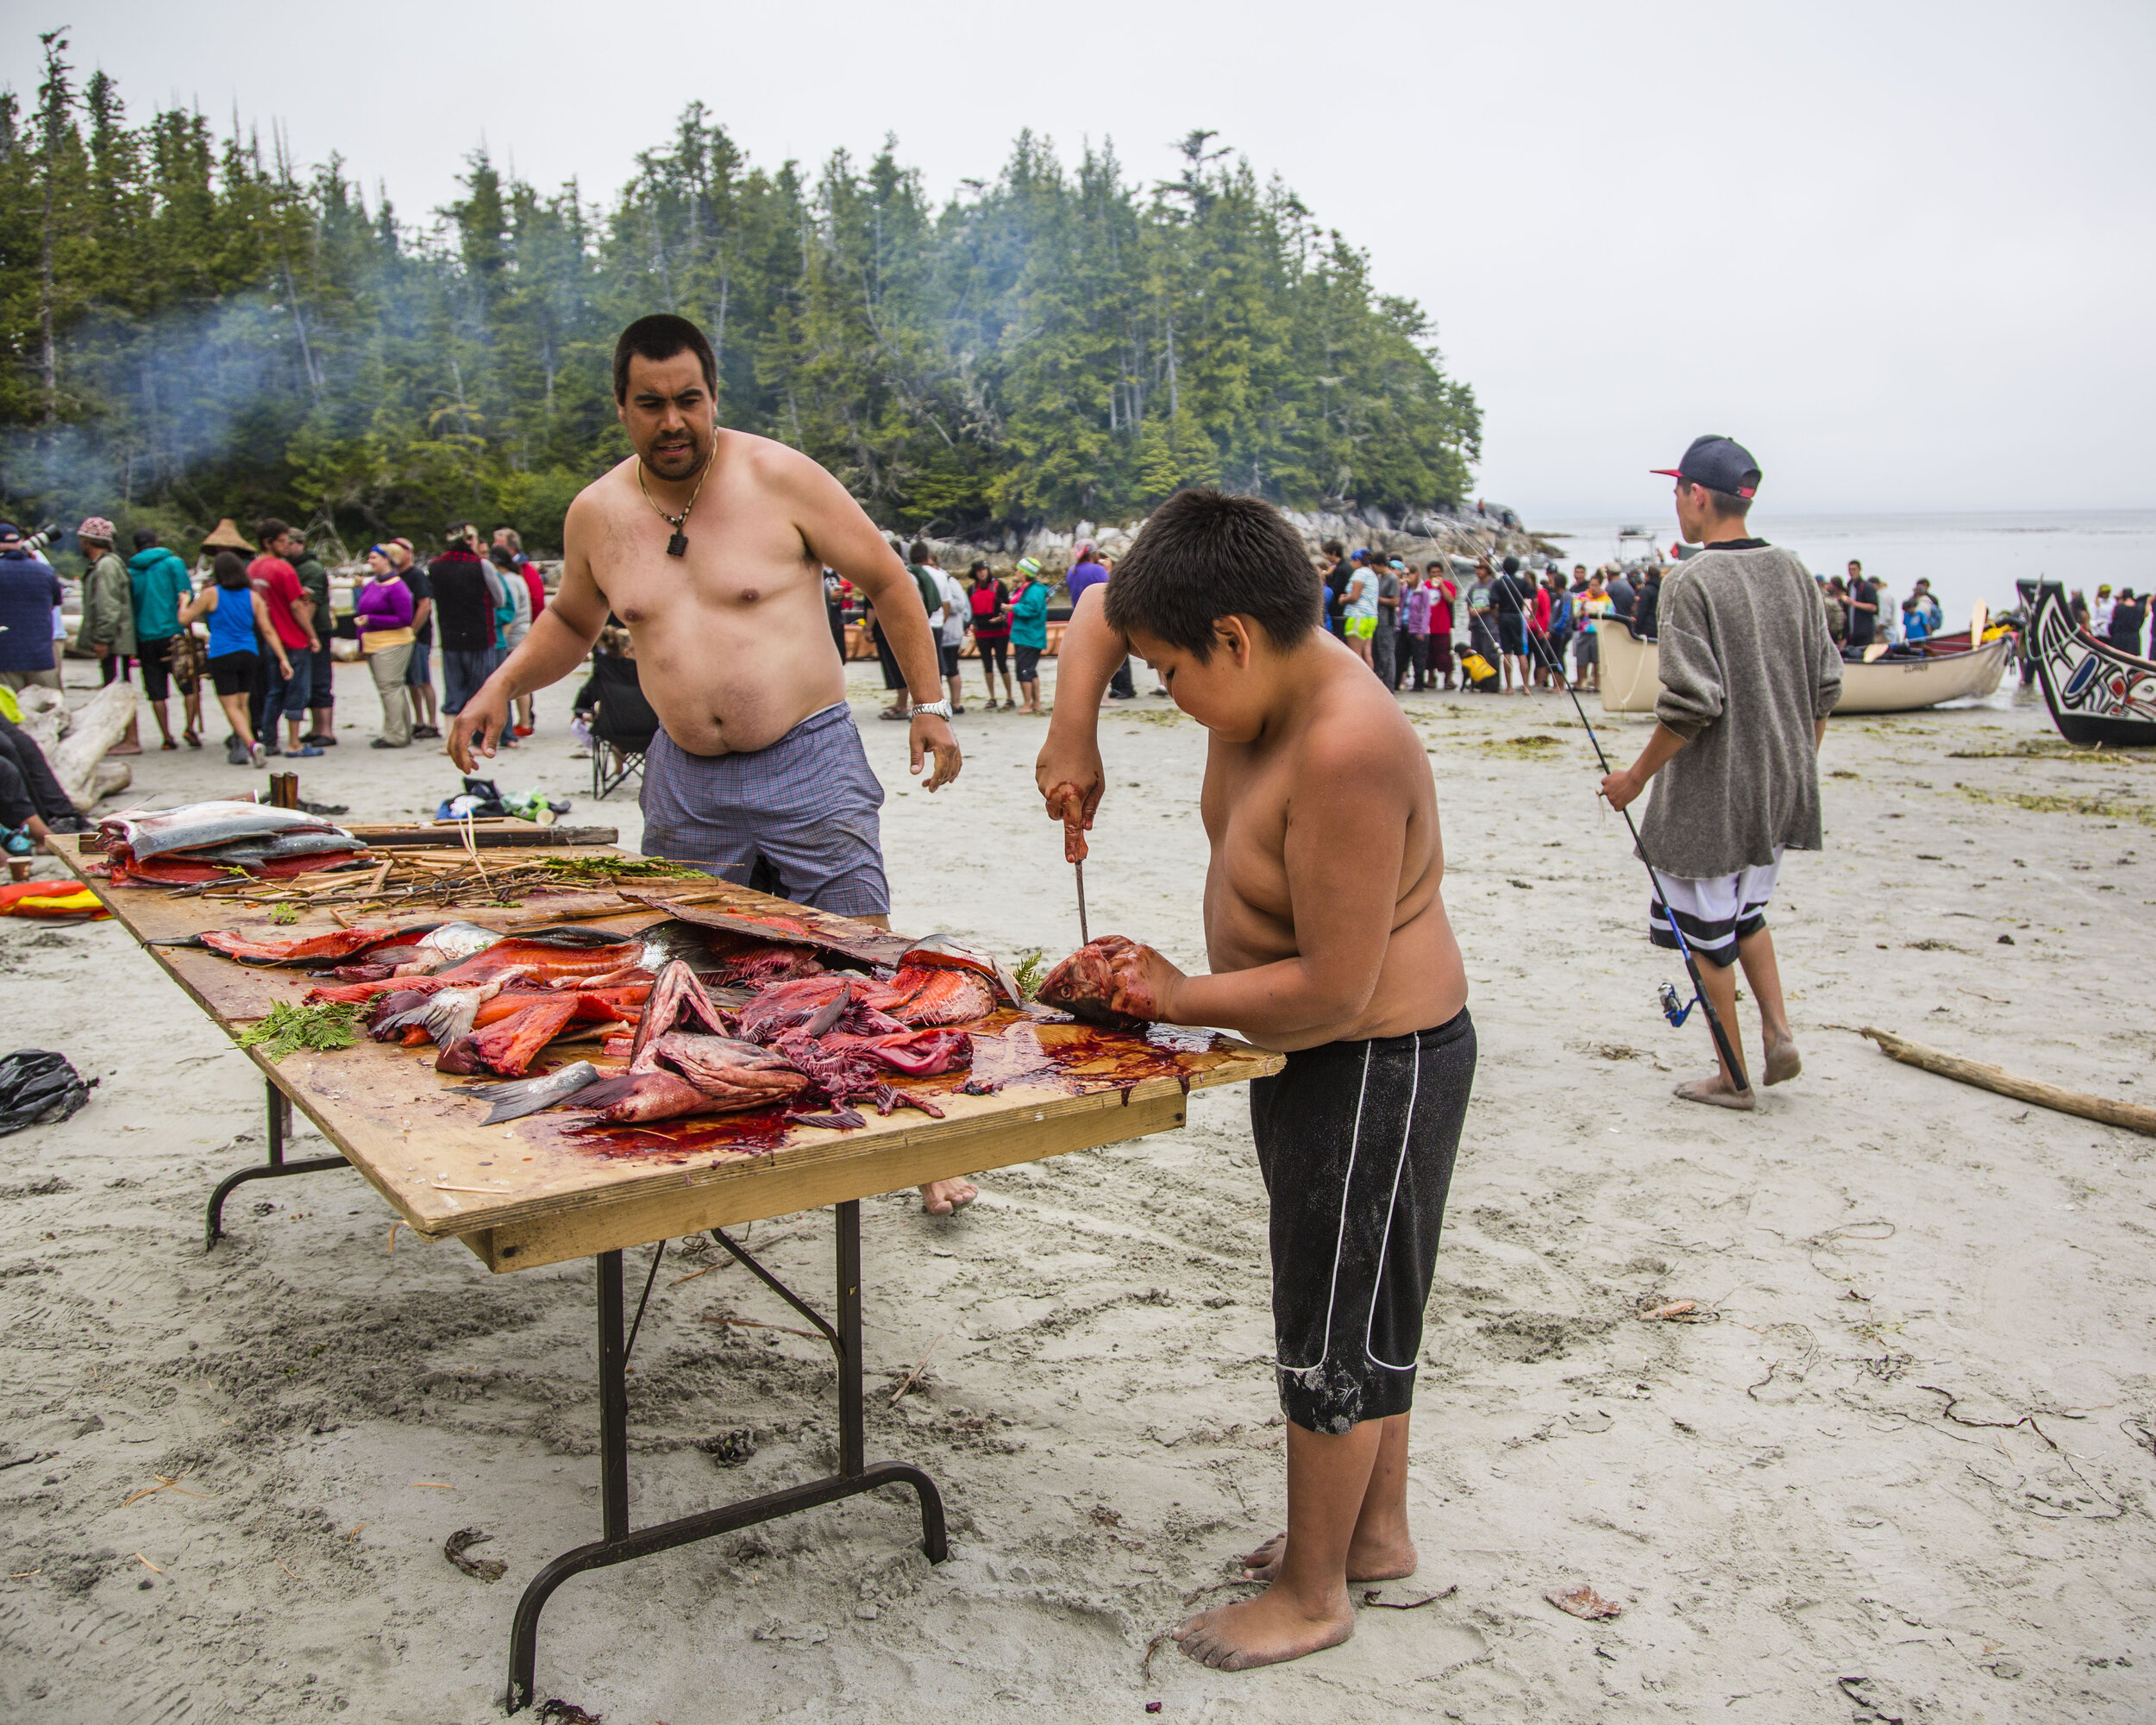  Two members of the Wuikinuxv First Nation prepare wild salmon to feed to guests to their territory duirng the annual Tribal Canoe Journey which brings together First Nations from up and down the Pacific Northwest. Each night the local First Nation w